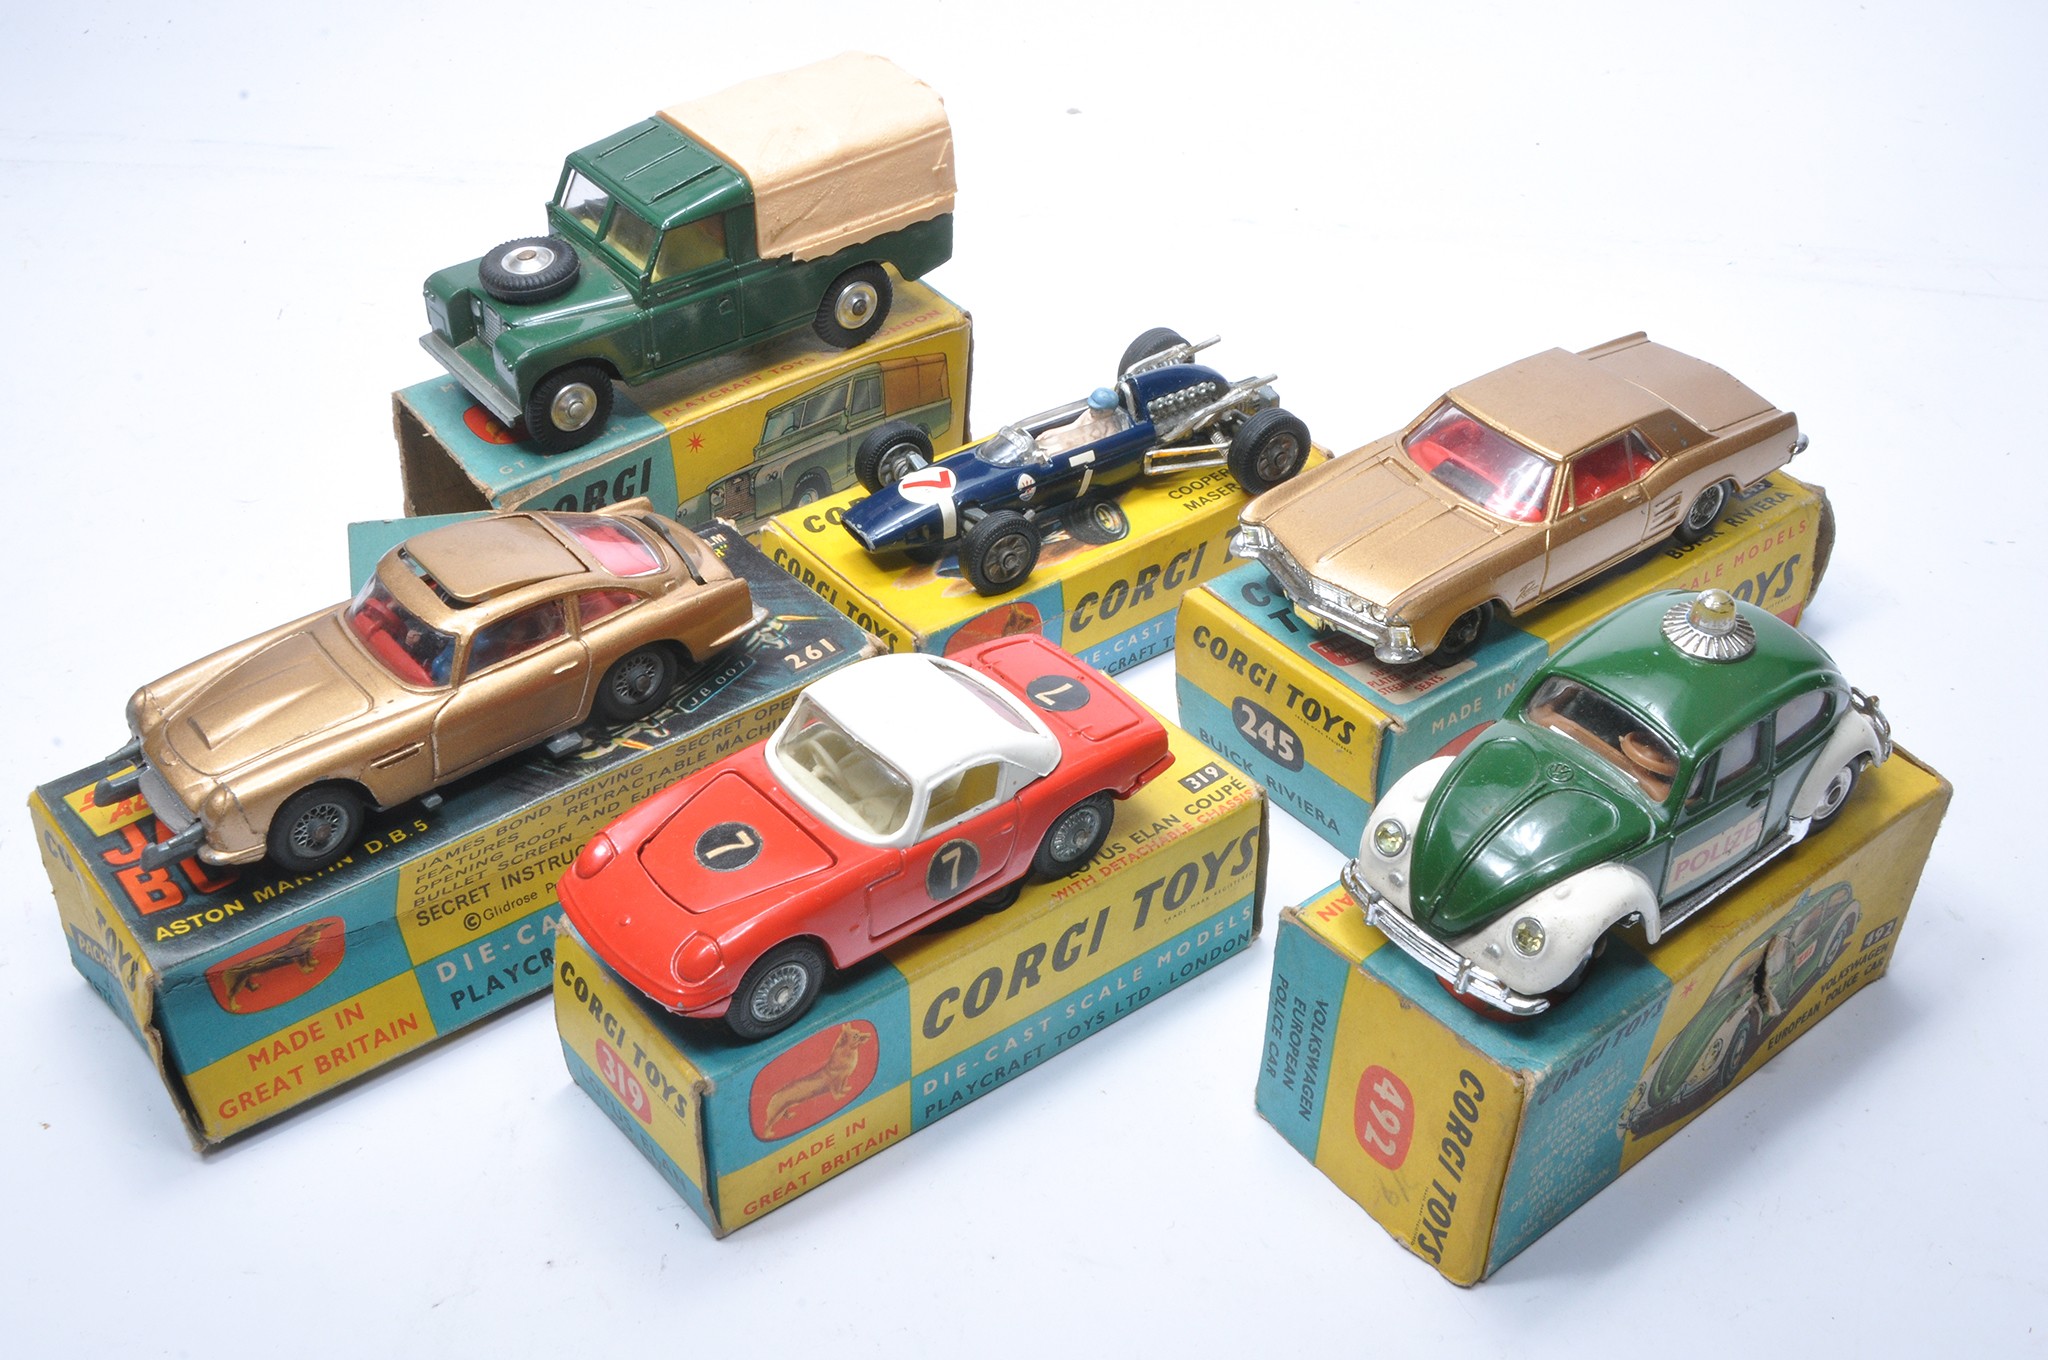 A group of six vintage 'playworn' diecast issues from Corgi with original boxes as shown. Note boxes